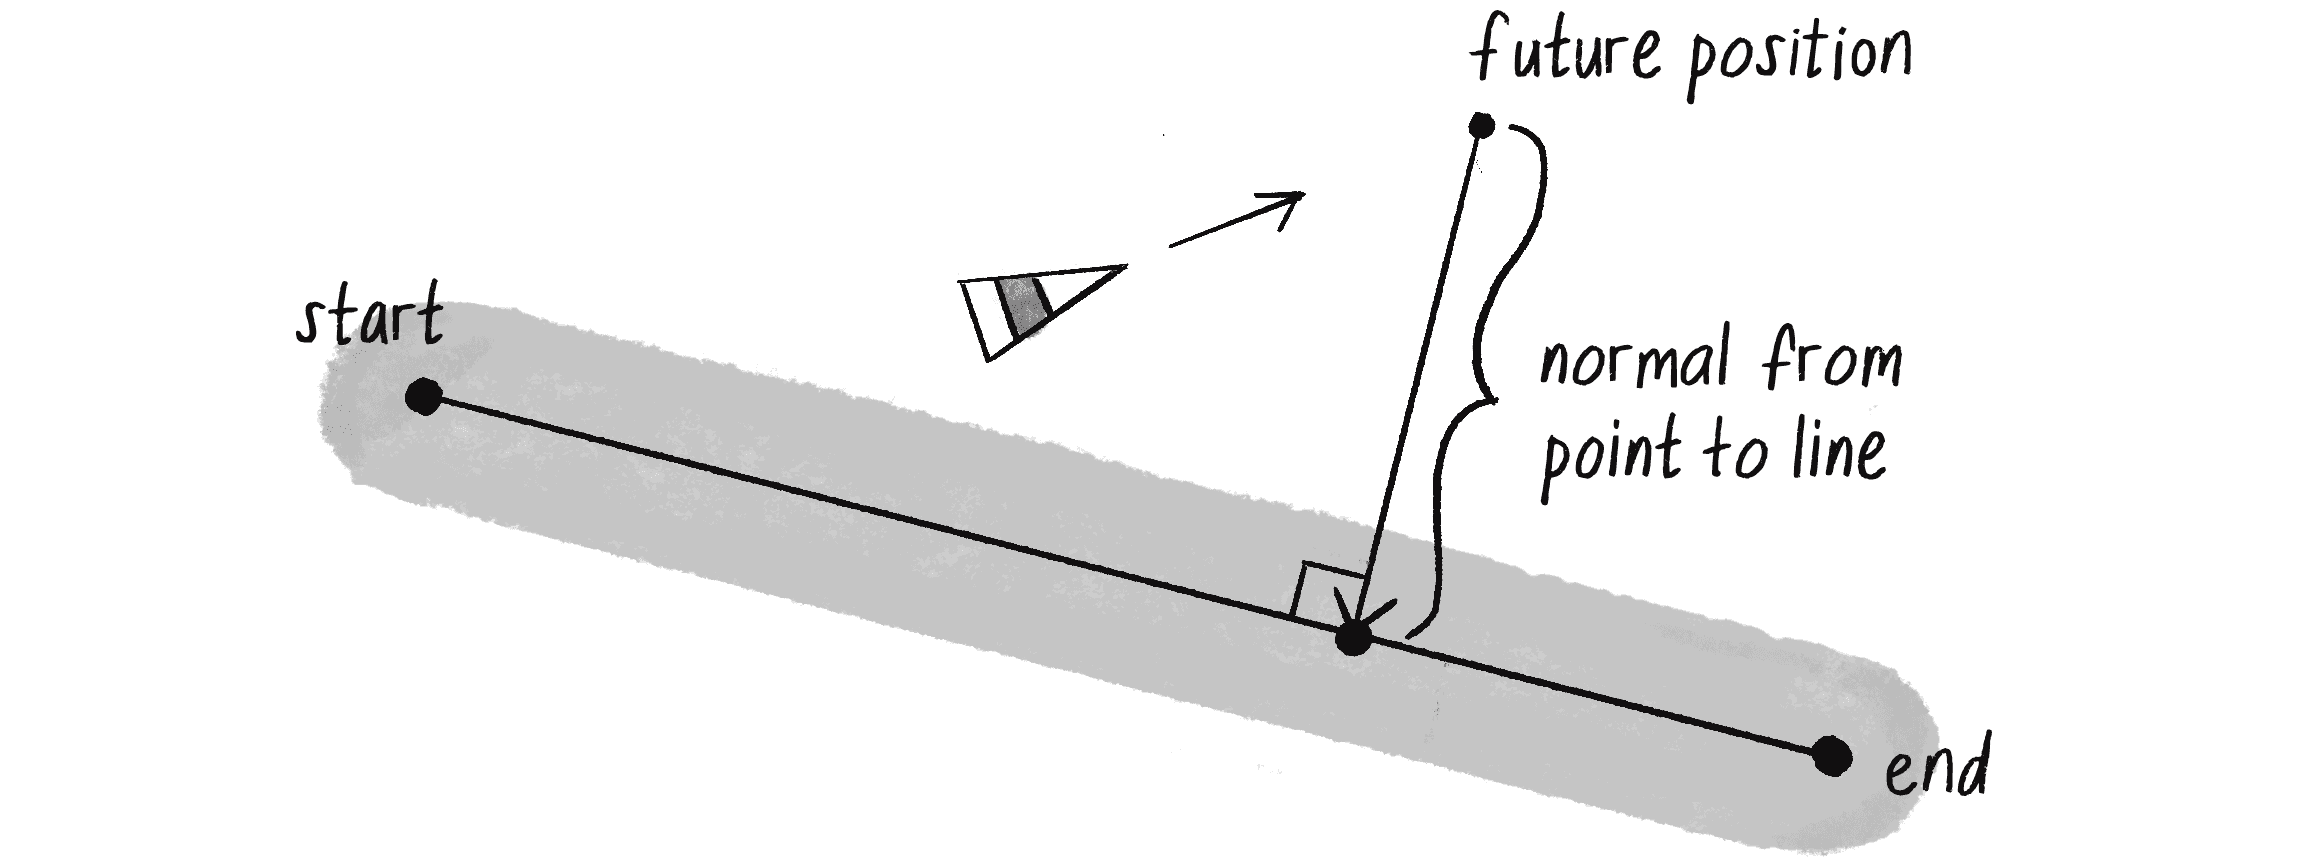 Figure 5.23: The normal is a vector that extends from the future position to the path and is perpendicular to the path.